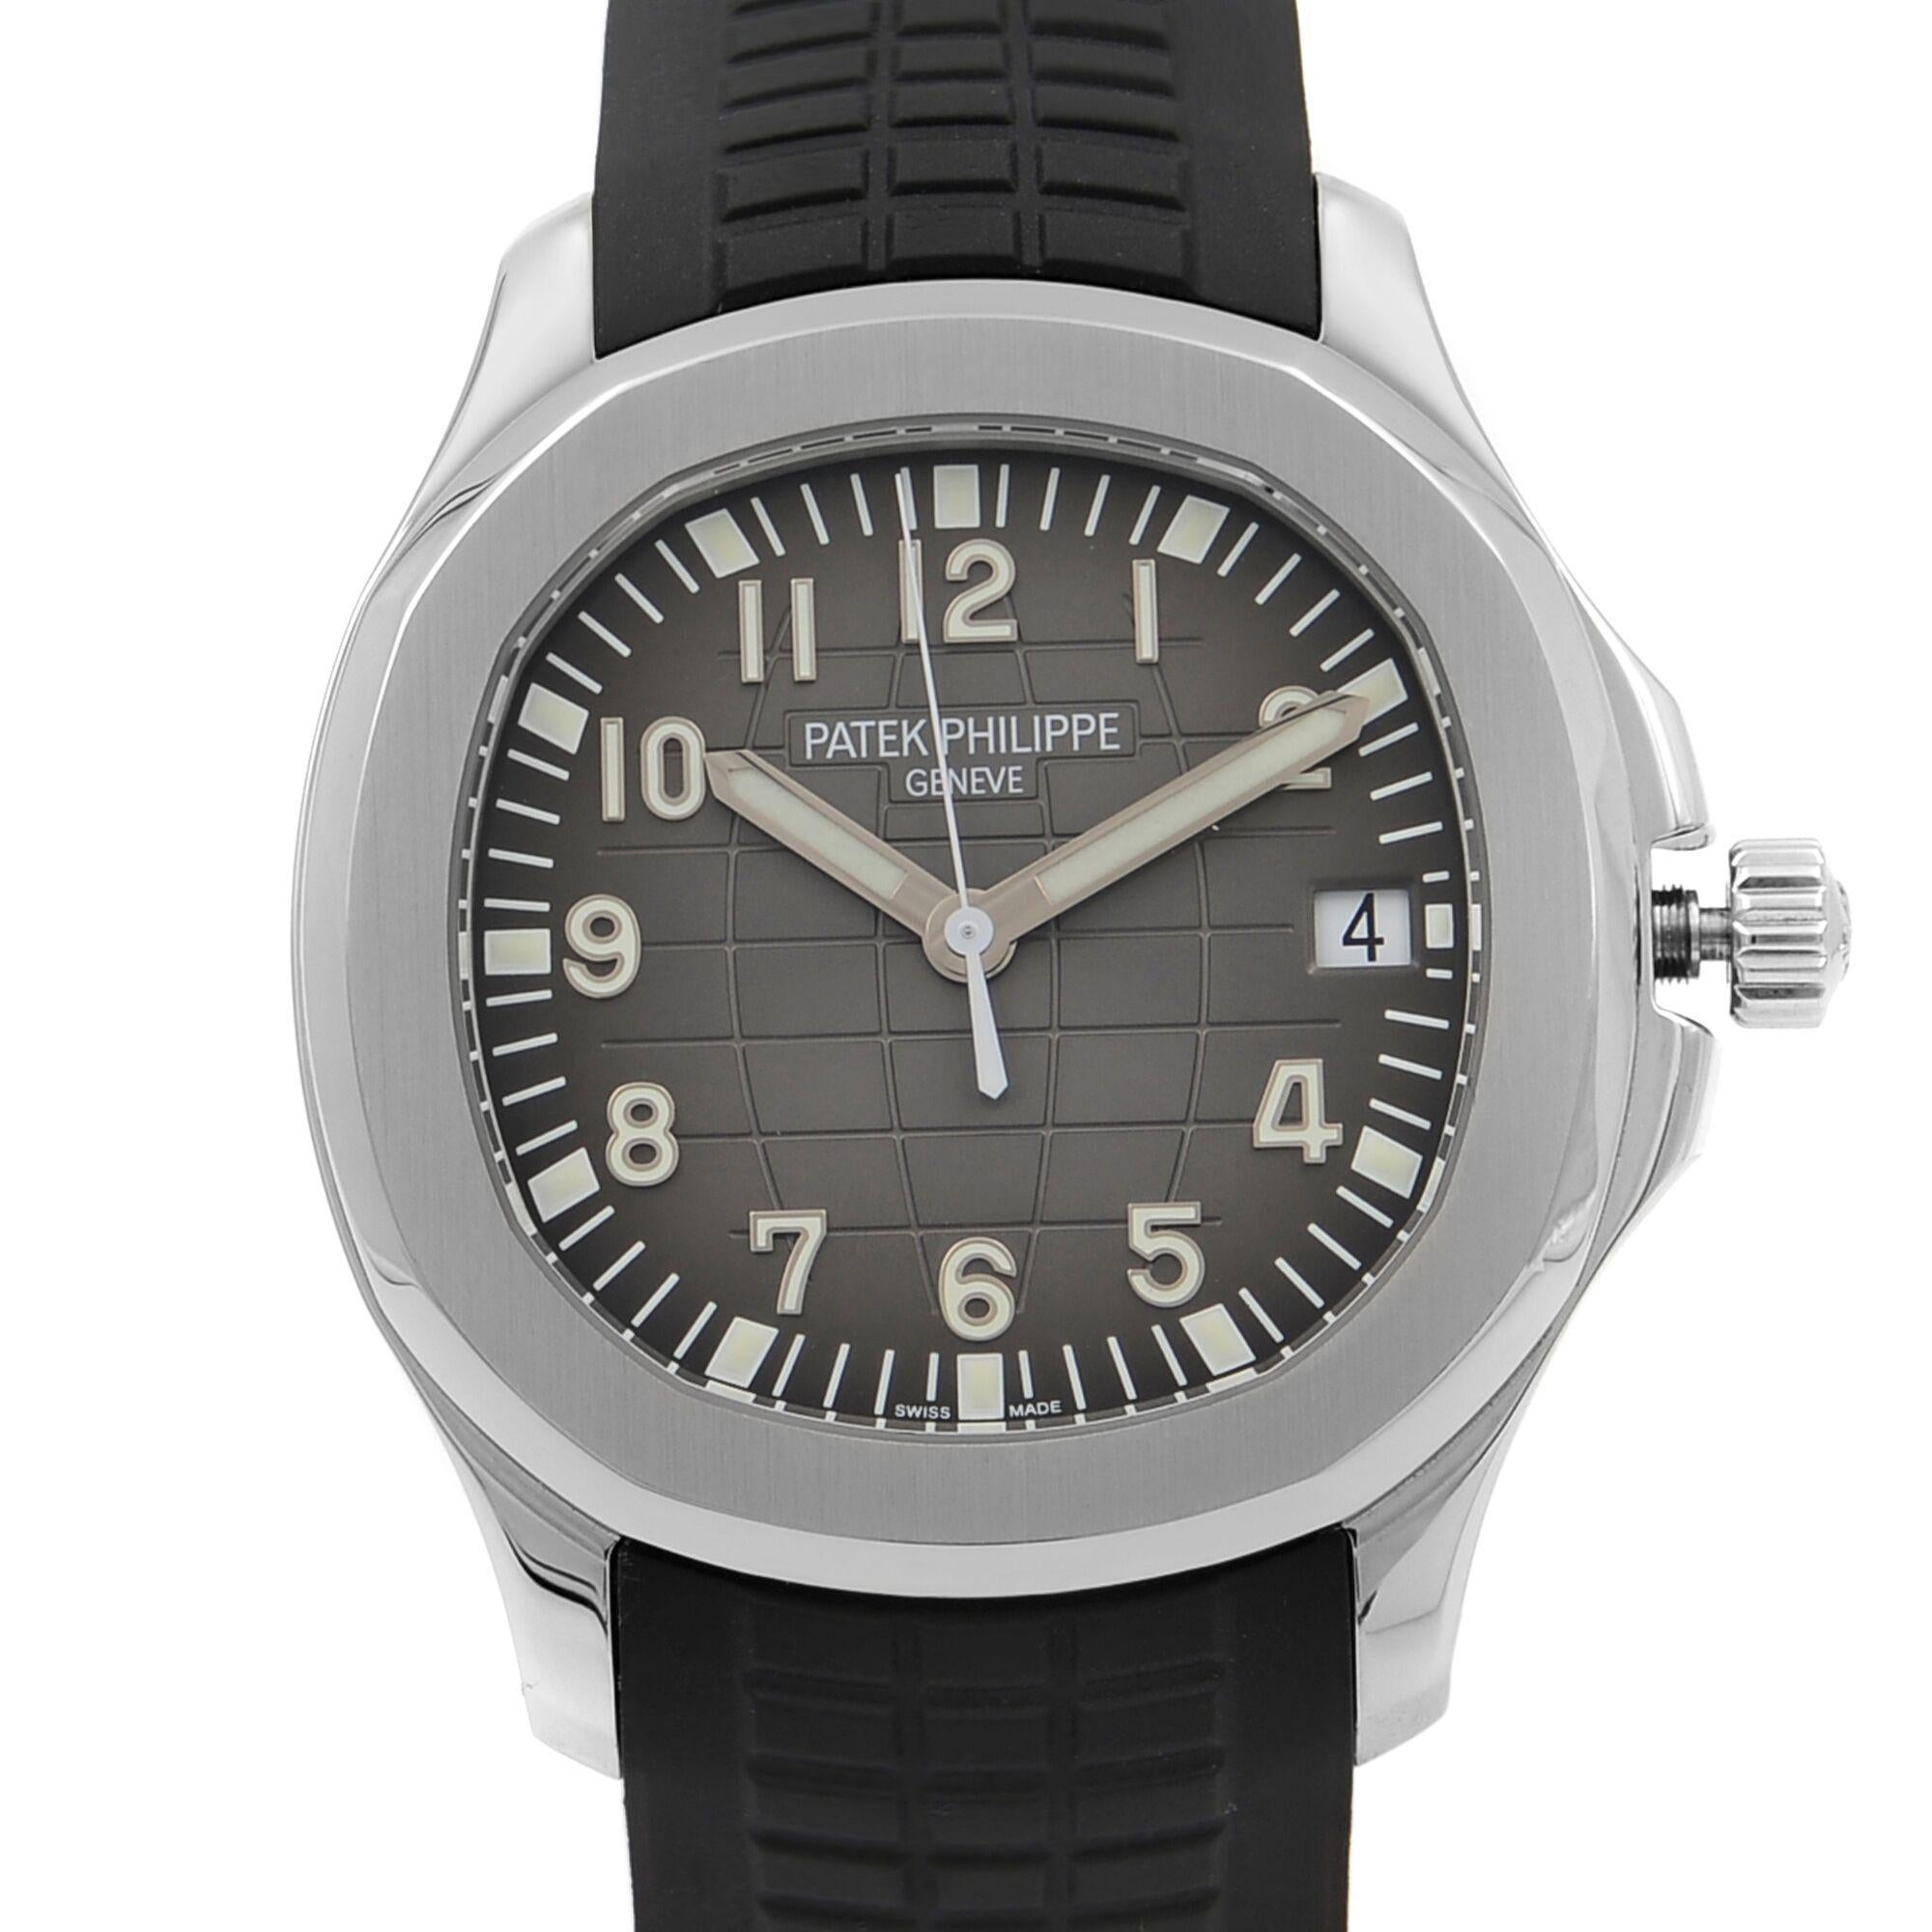 This pre-owned mint condition Patek Philippe Aquanaut  5167A-001 is a beautiful men's timepiece that is powered by mechanical (automatic) movement which is cased in a stainless steel case. It has a round shape face, date indicator dial and has hand 